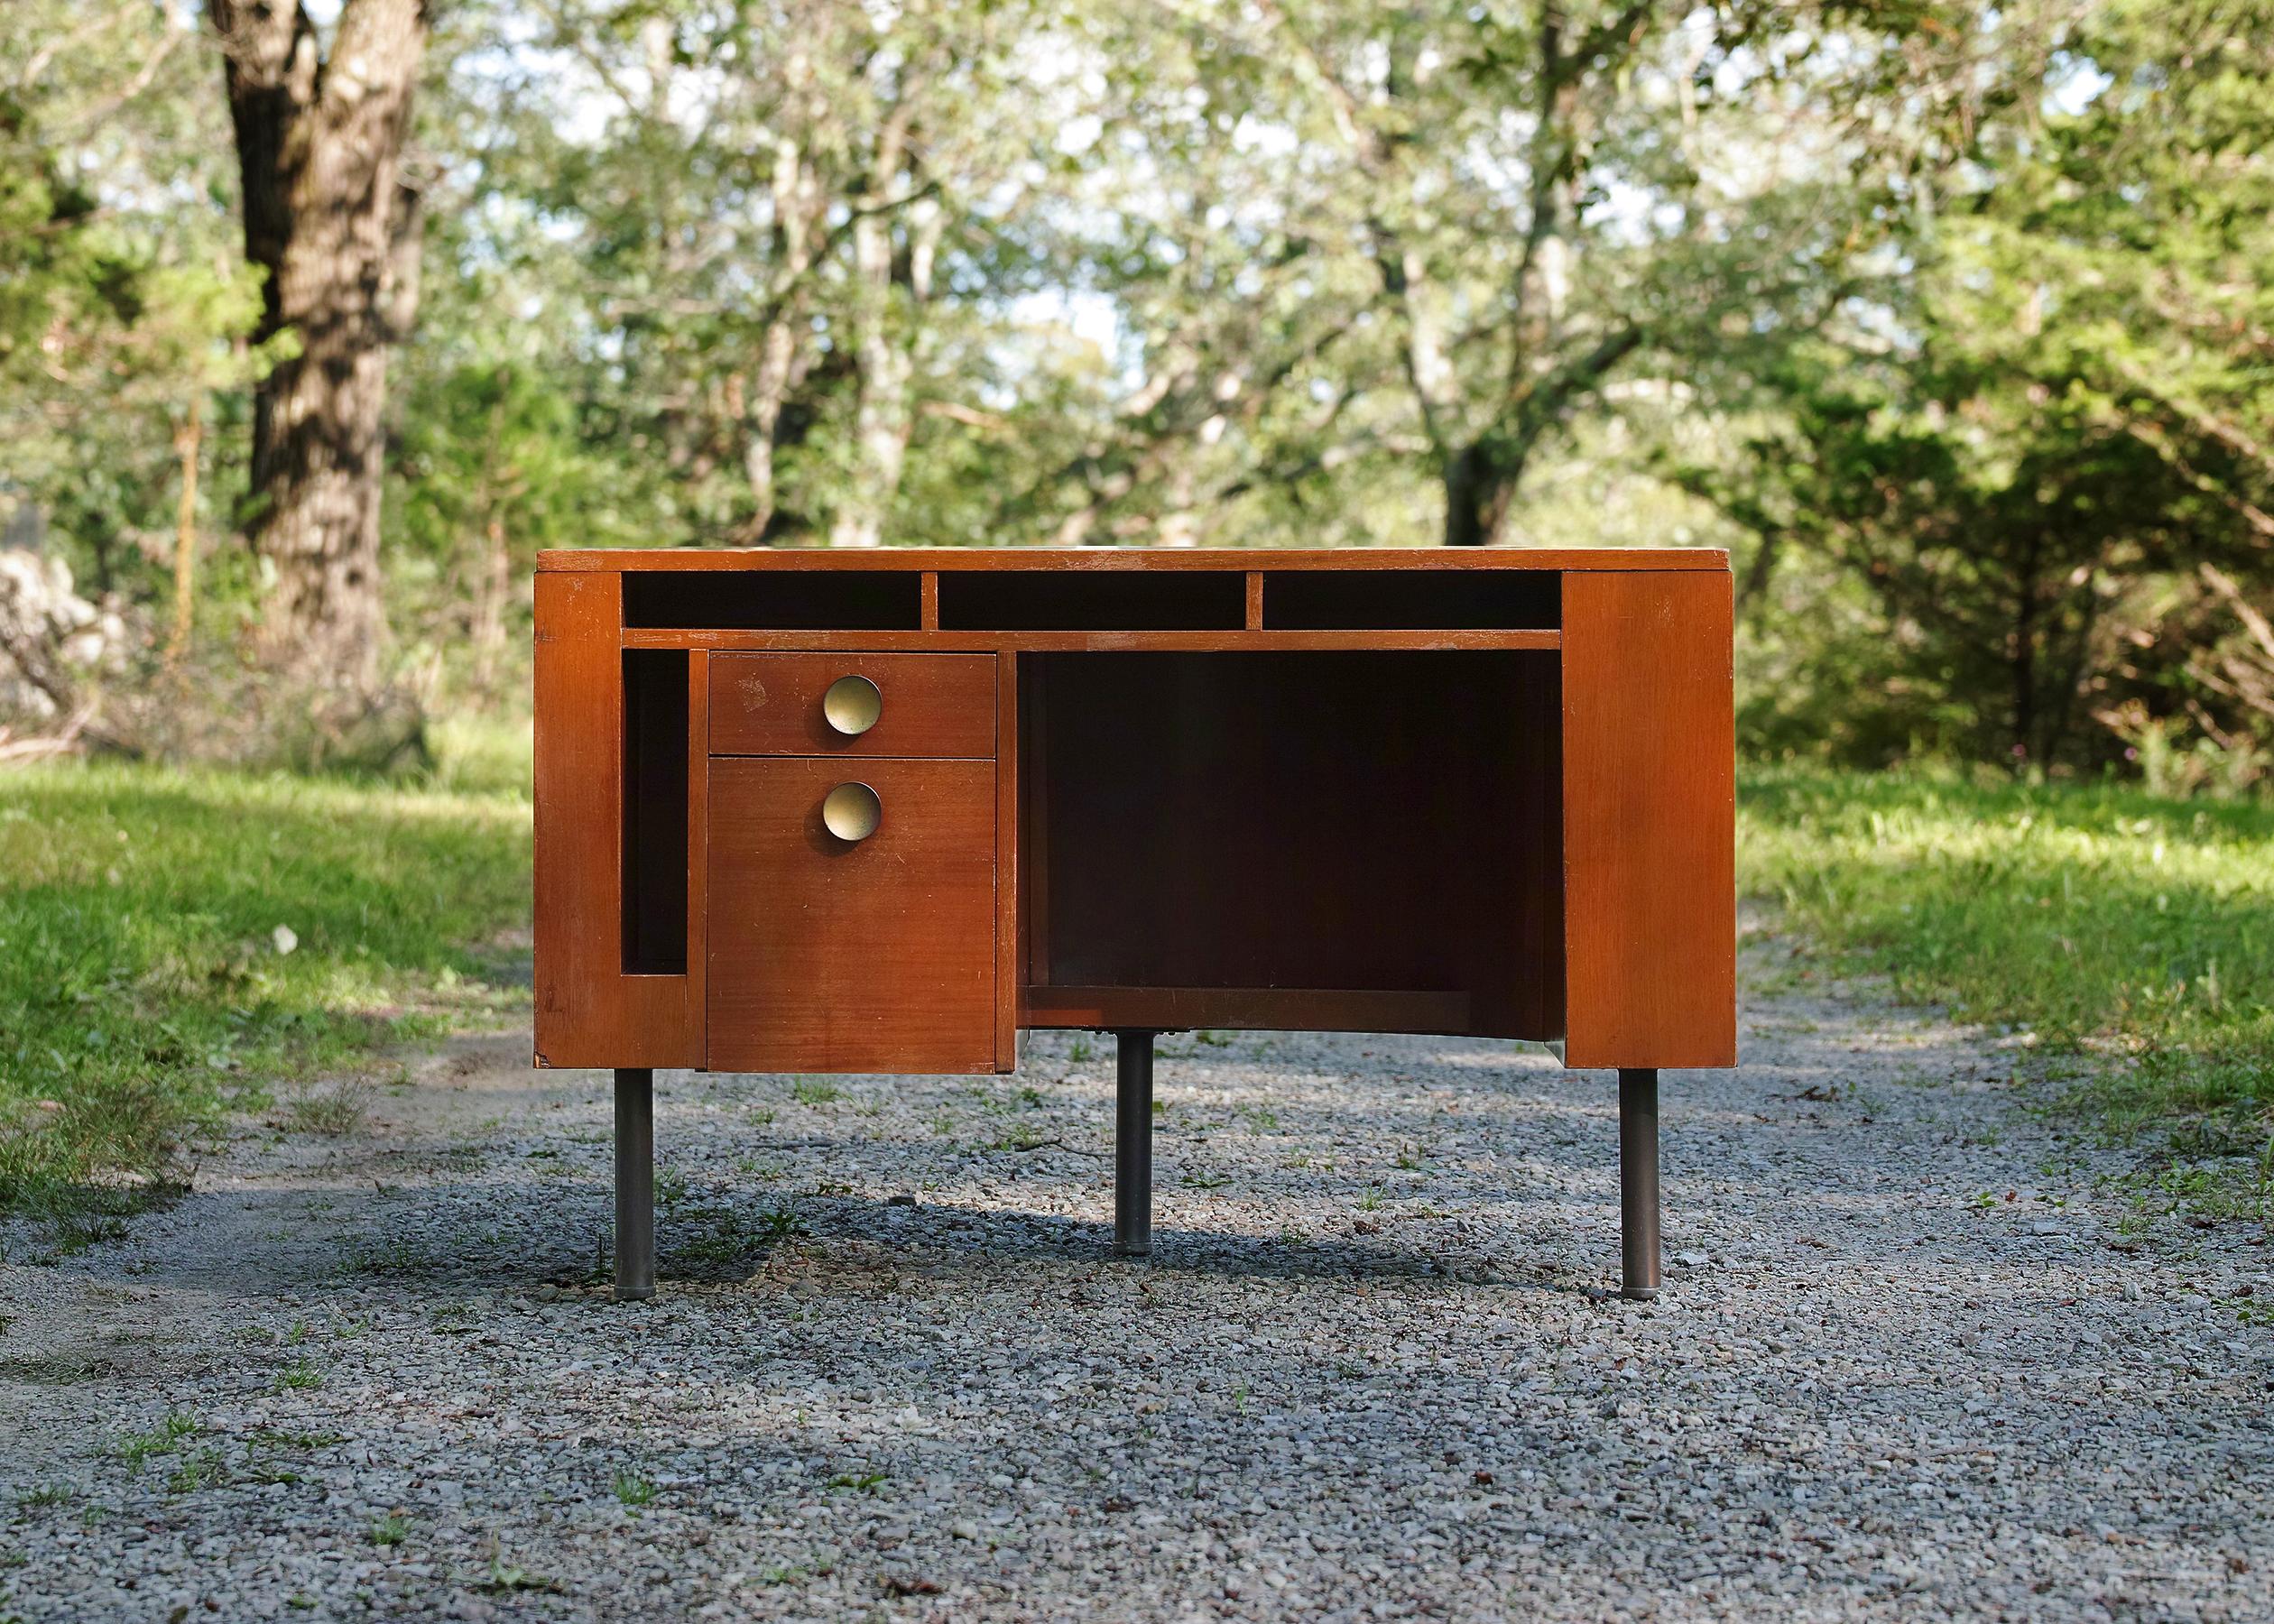 For your consideration is this rare Gilbert Rohde EOG No. 17 Receptionist Desk manufactured by Herman Miller in the 1940s. The desk is in original, unrestored condition. It's composed of walnut veneer with original drawer pulls and original bronze